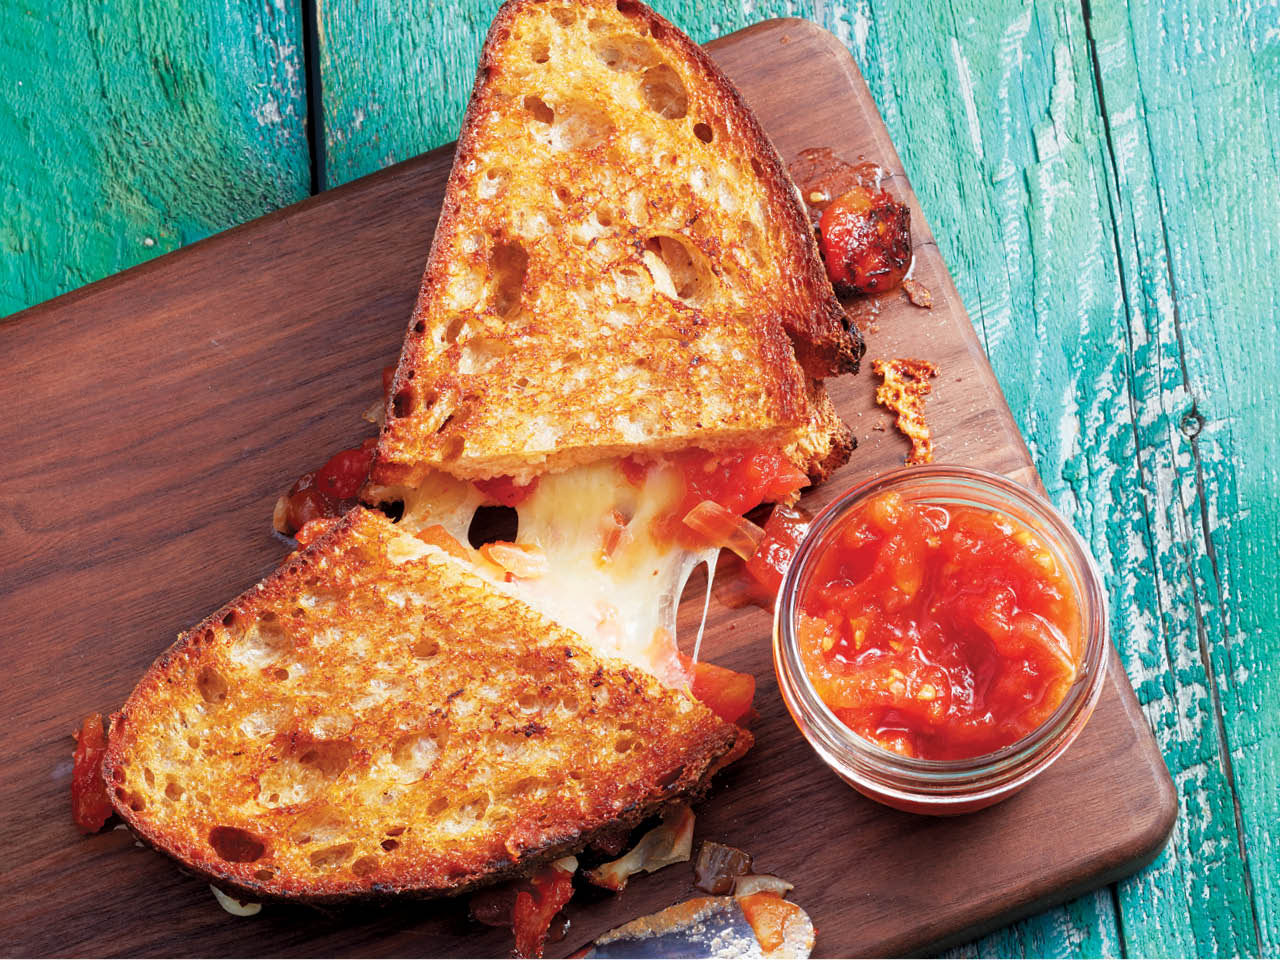 Melted cheese inside a grilled cheese with tomato jam